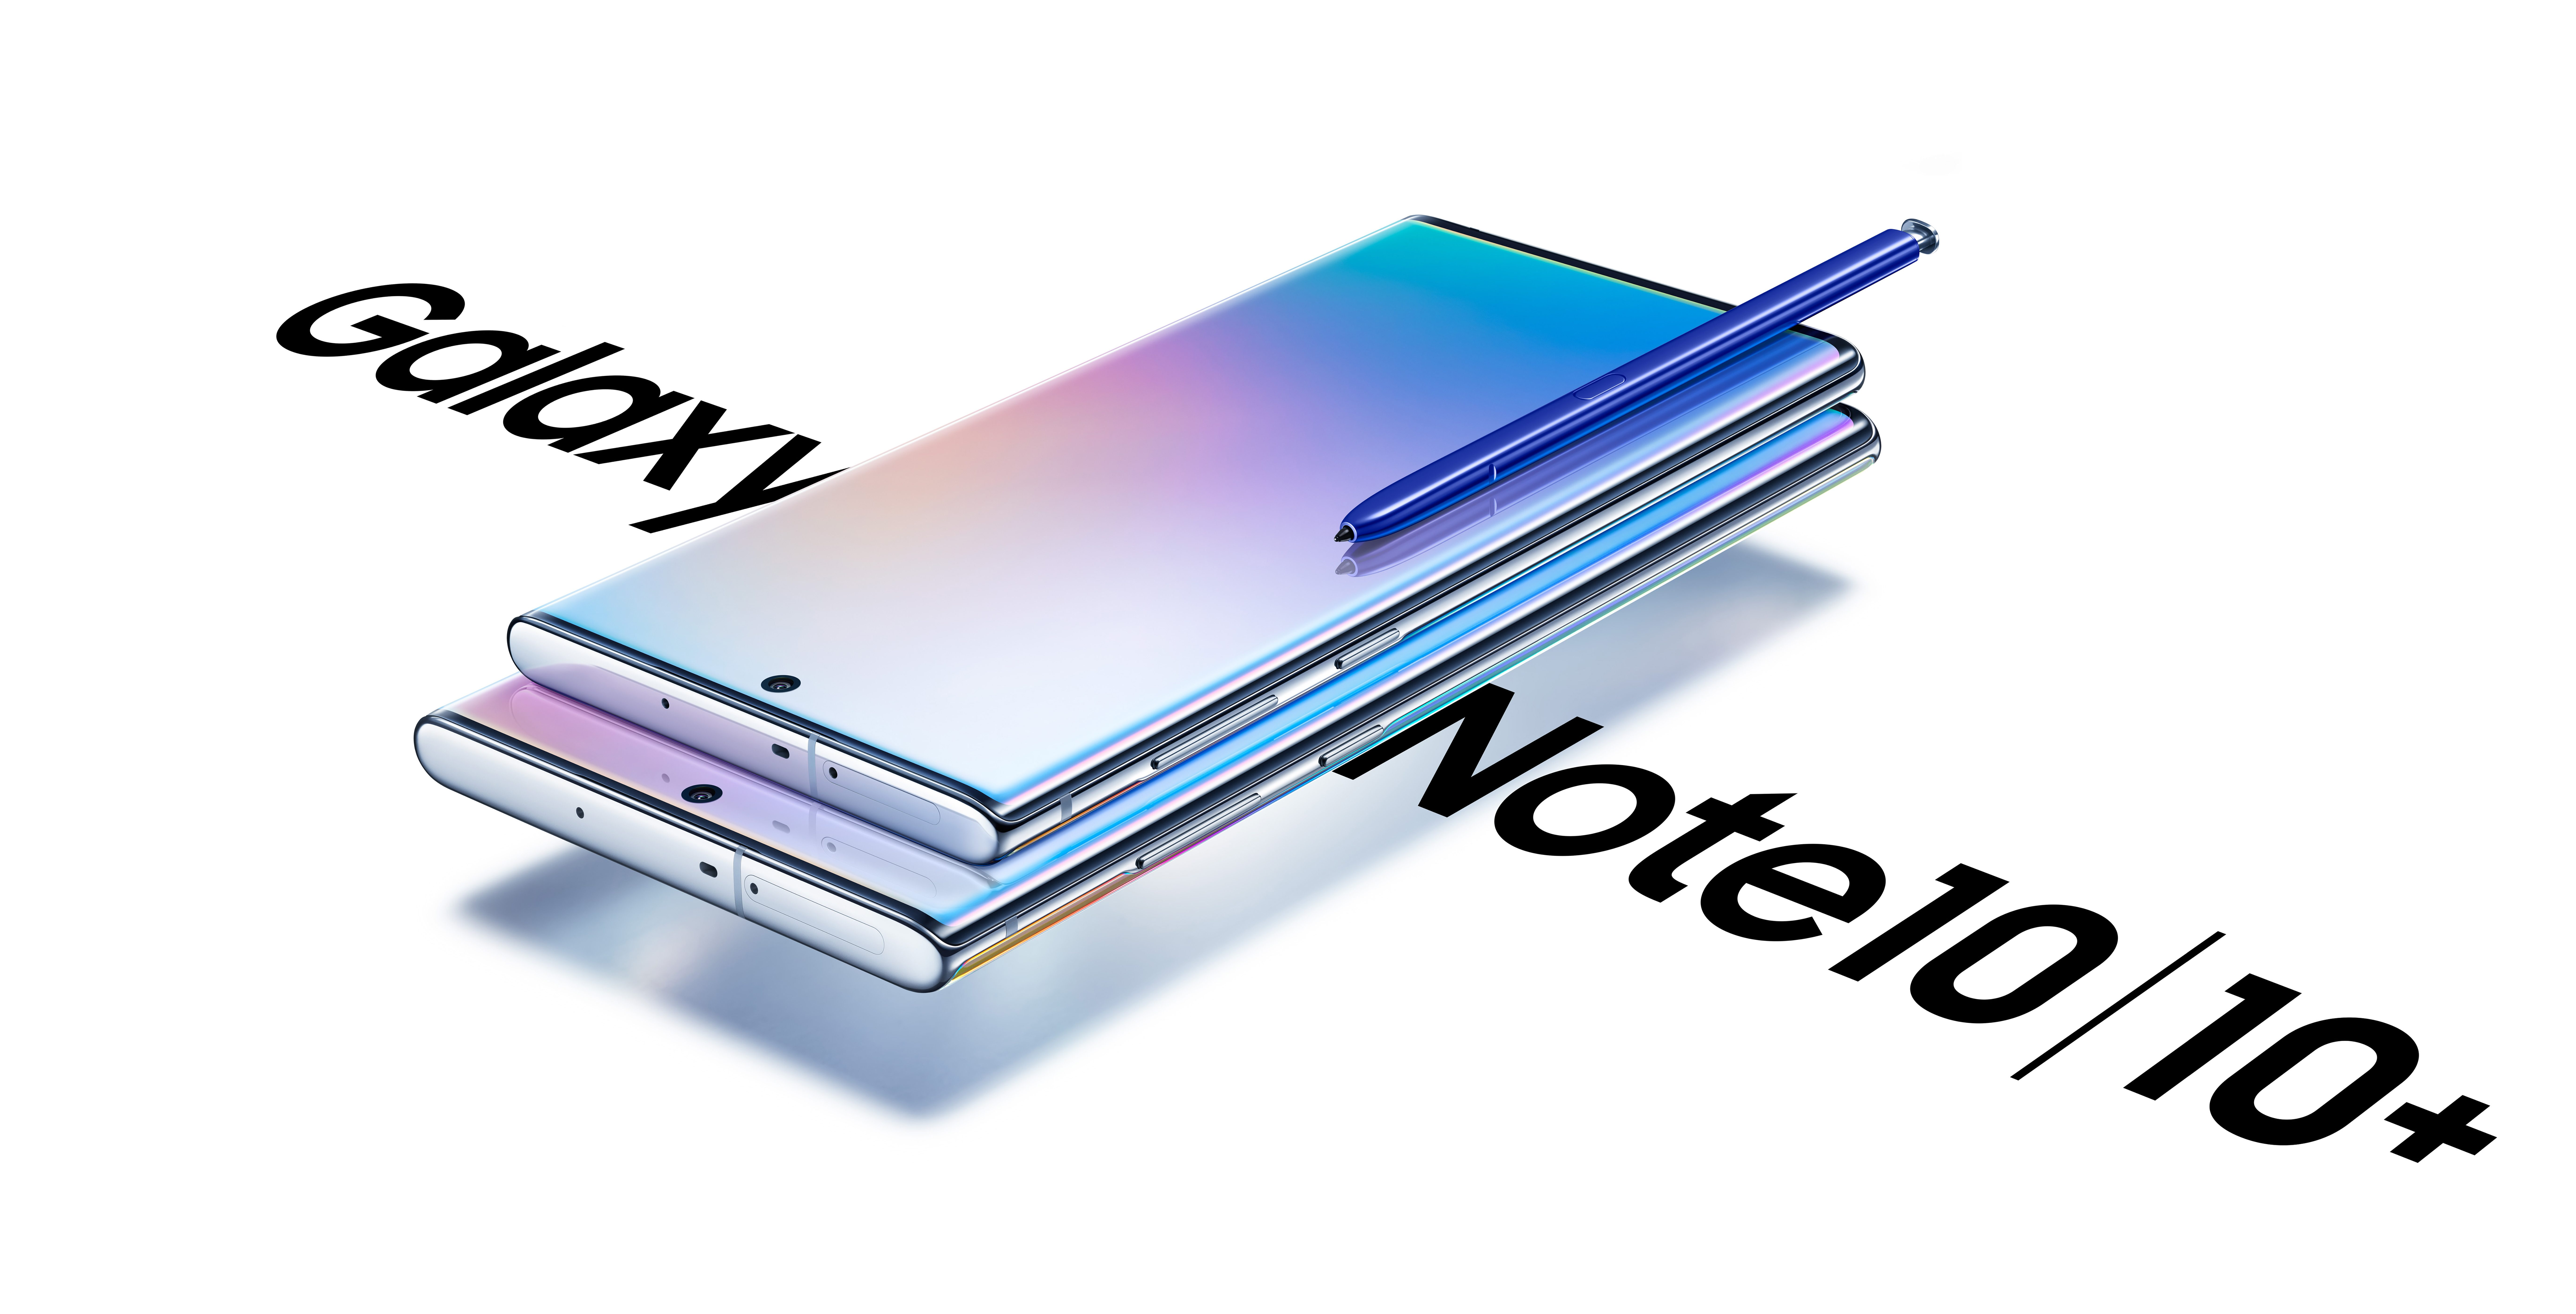 Samsung Galaxy Note 10: India launch date, price, pre-order details revealed